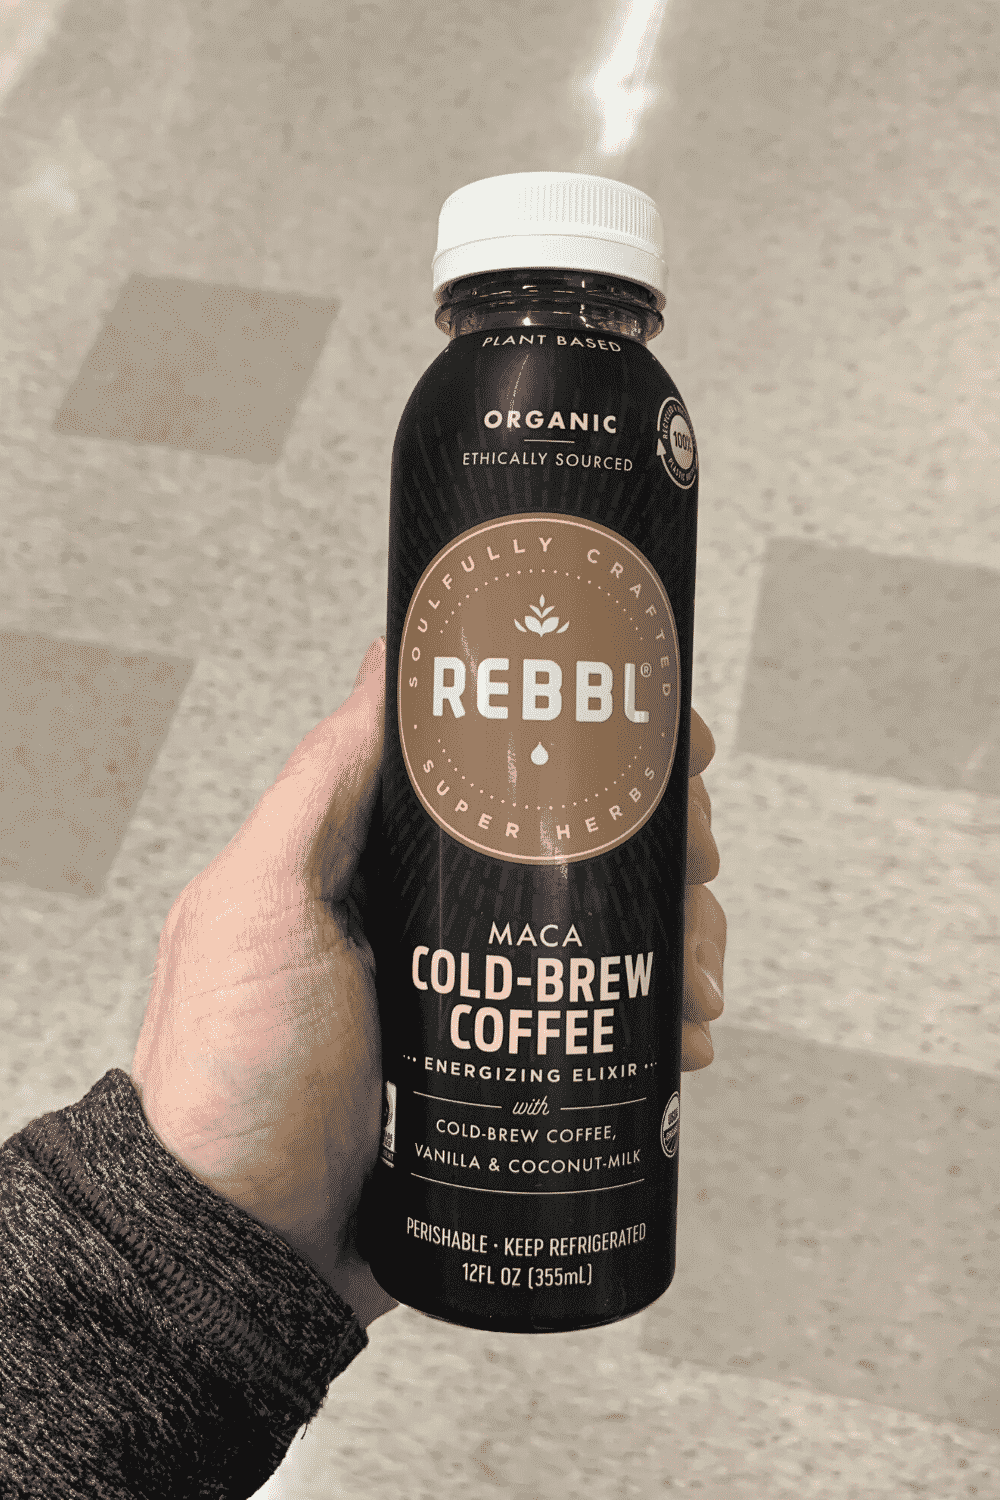 A hand holding a bottle of Rebbl maca cold-brew coffee